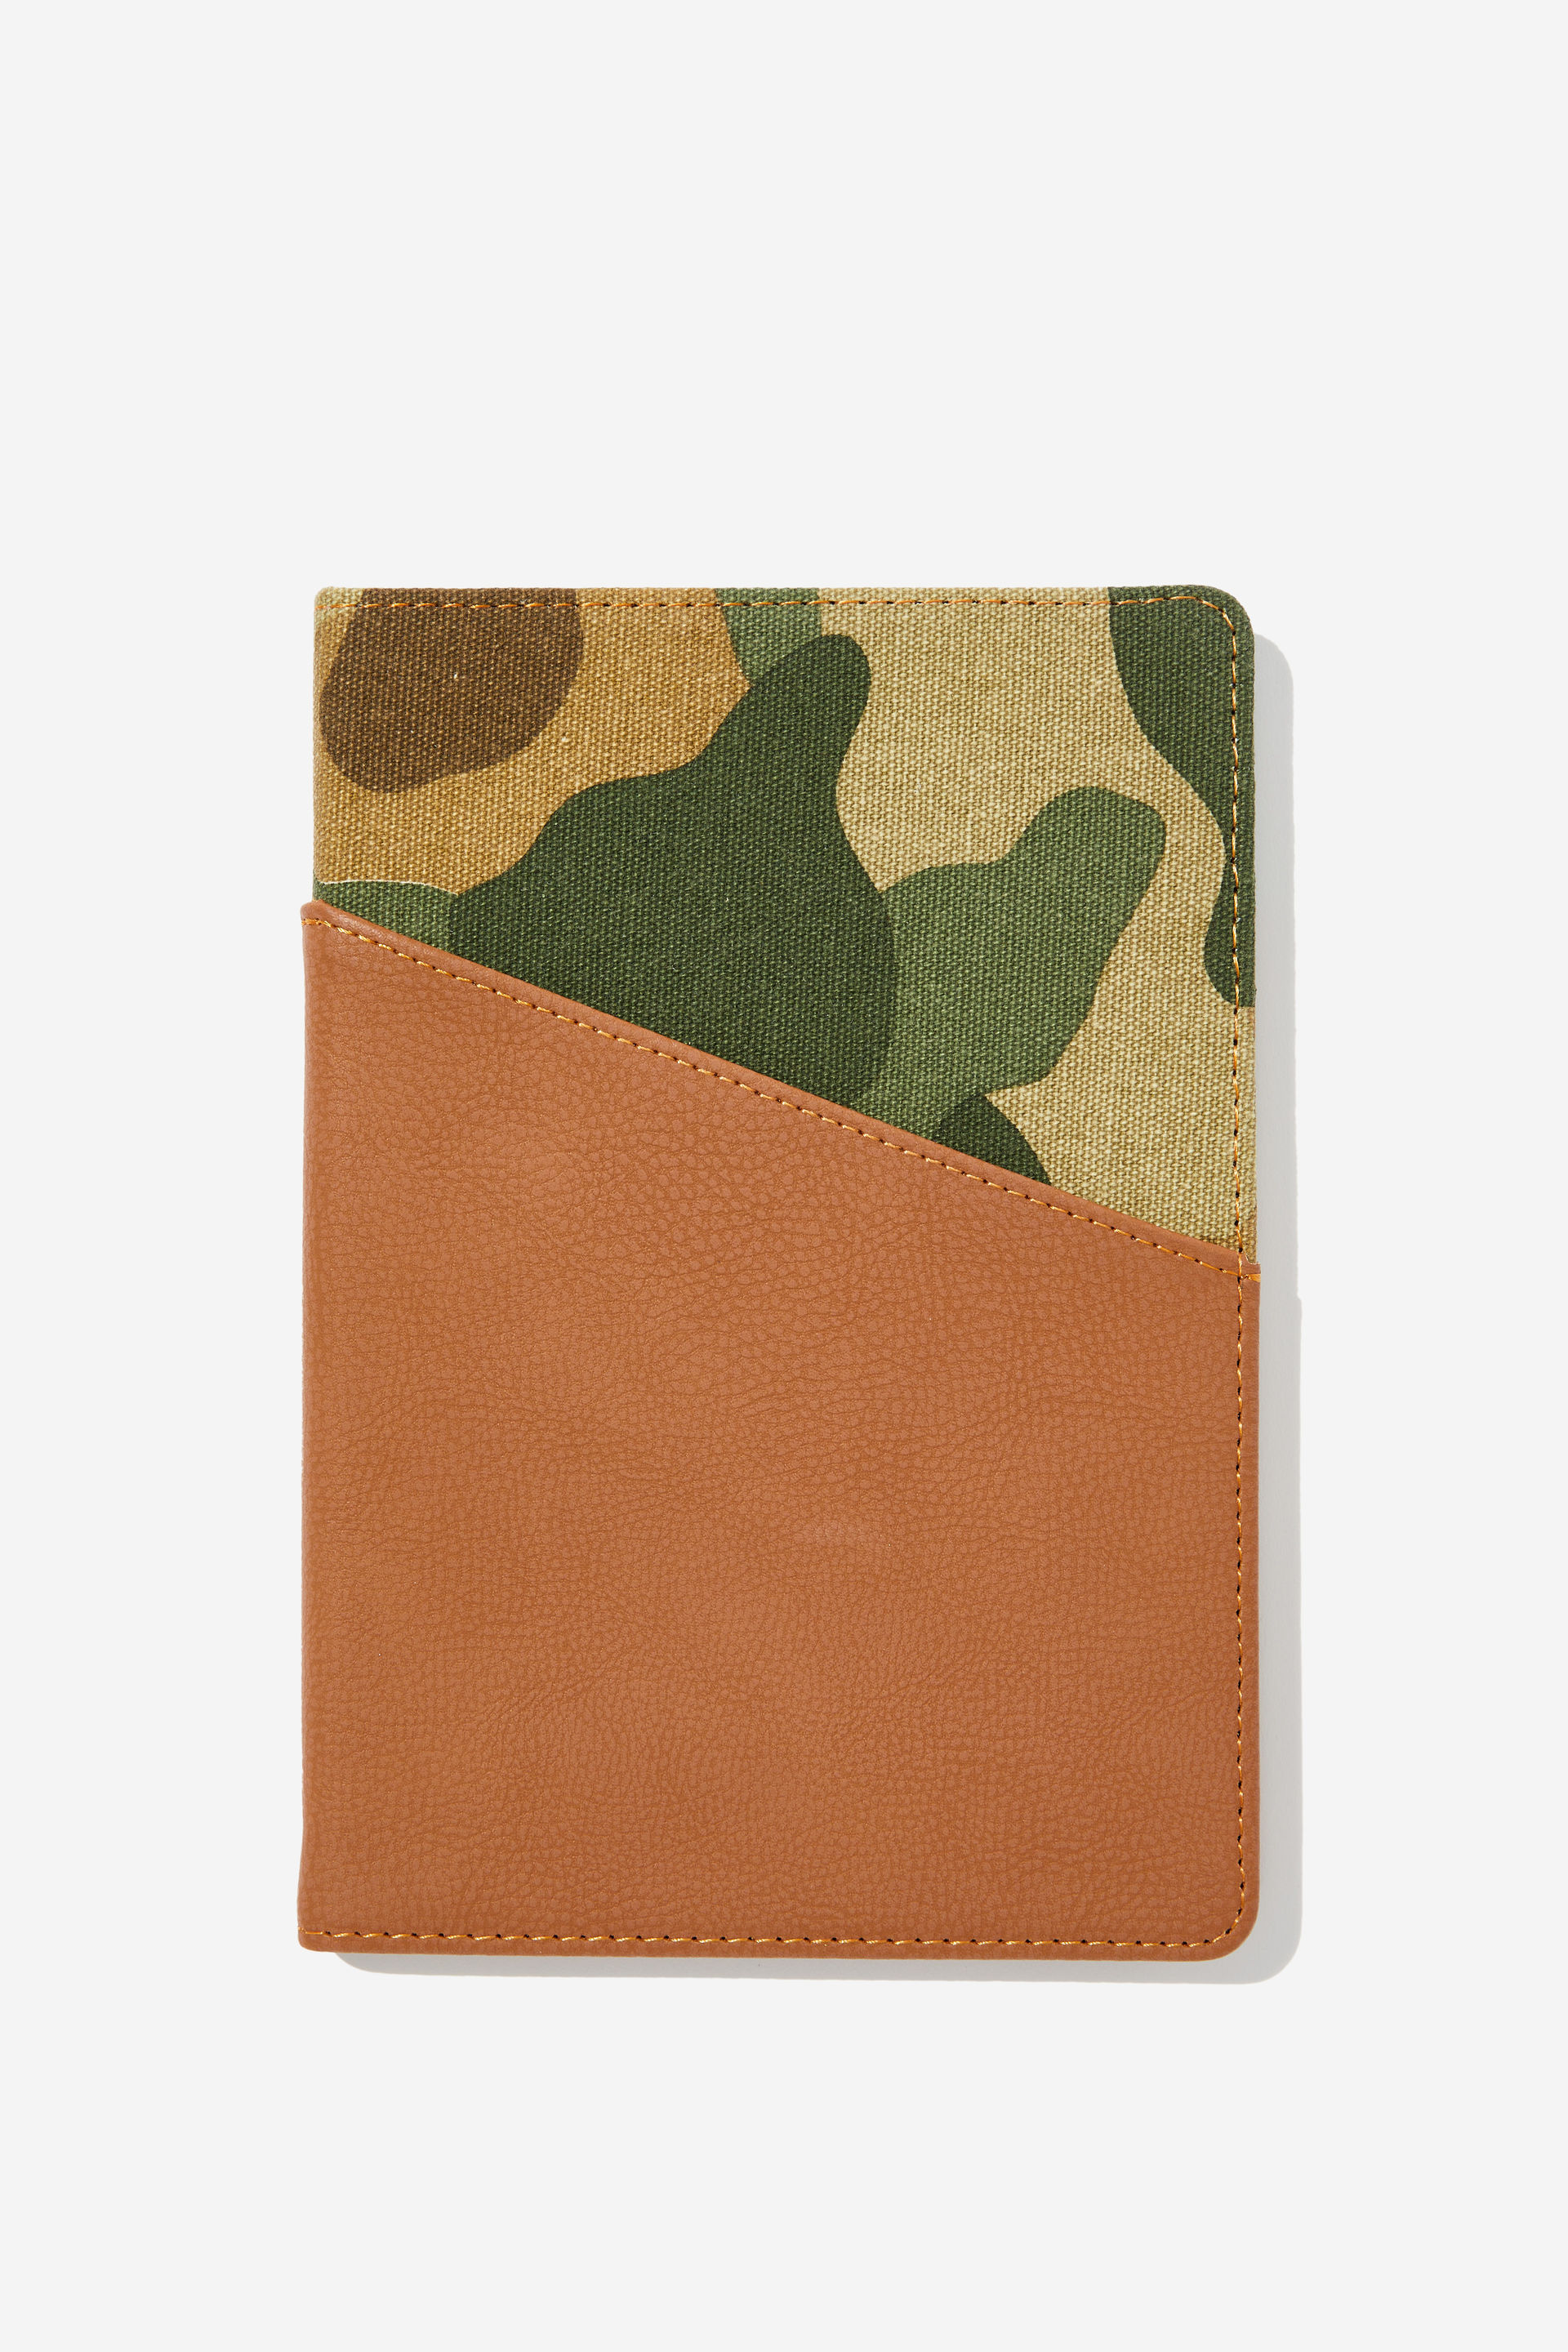 Typo - A5 Arlow Journal - Tan and camo